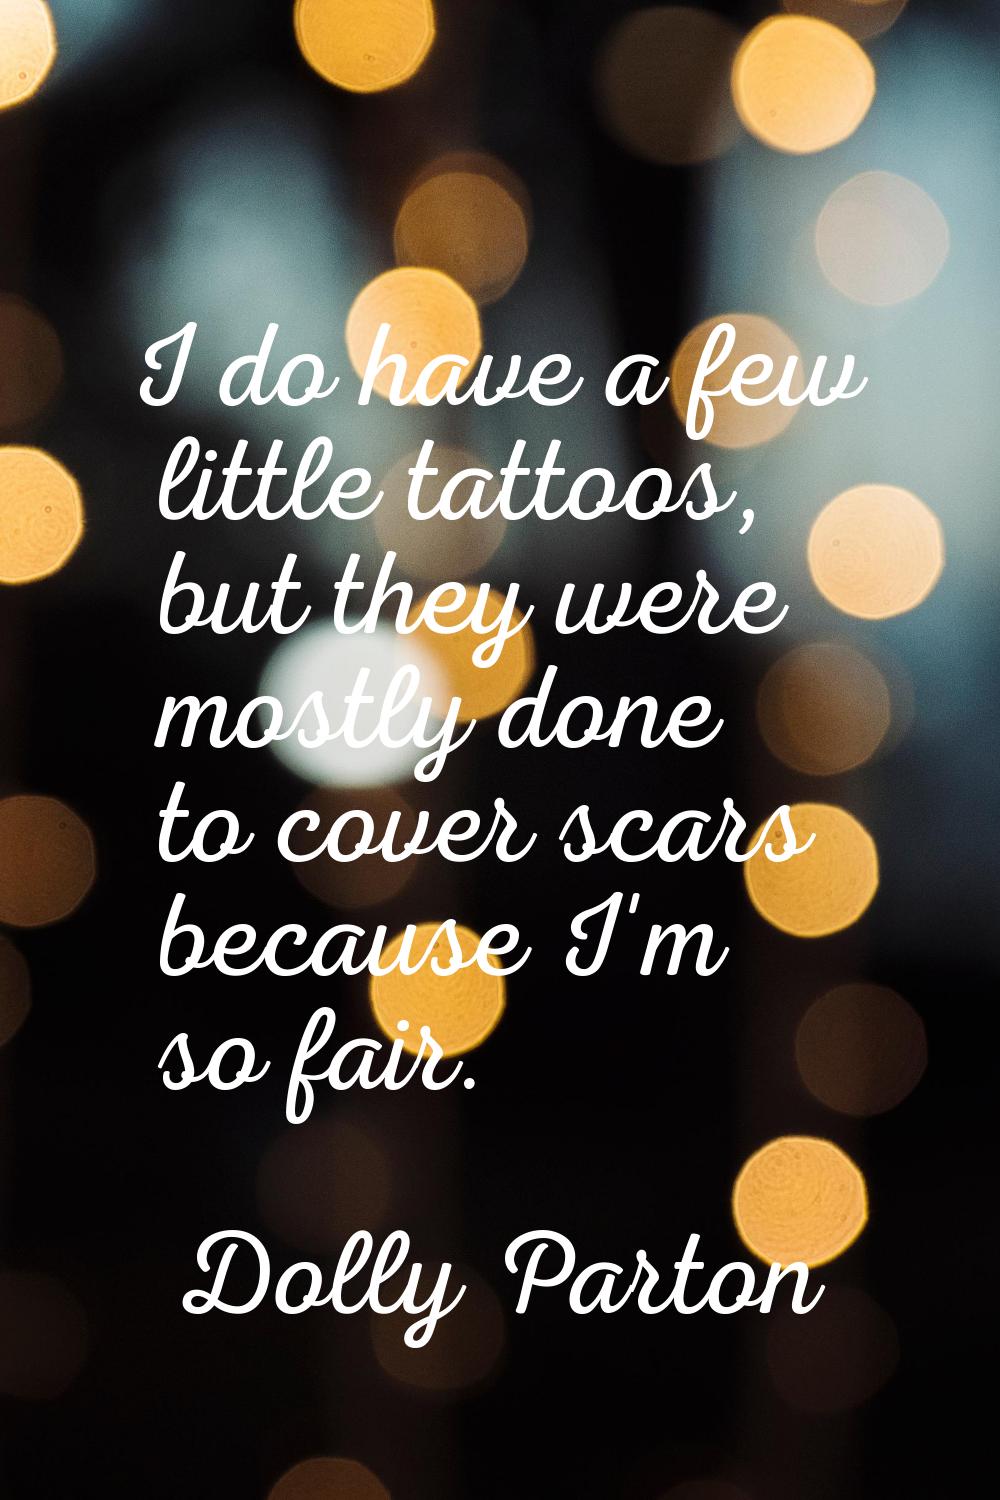 I do have a few little tattoos, but they were mostly done to cover scars because I'm so fair.